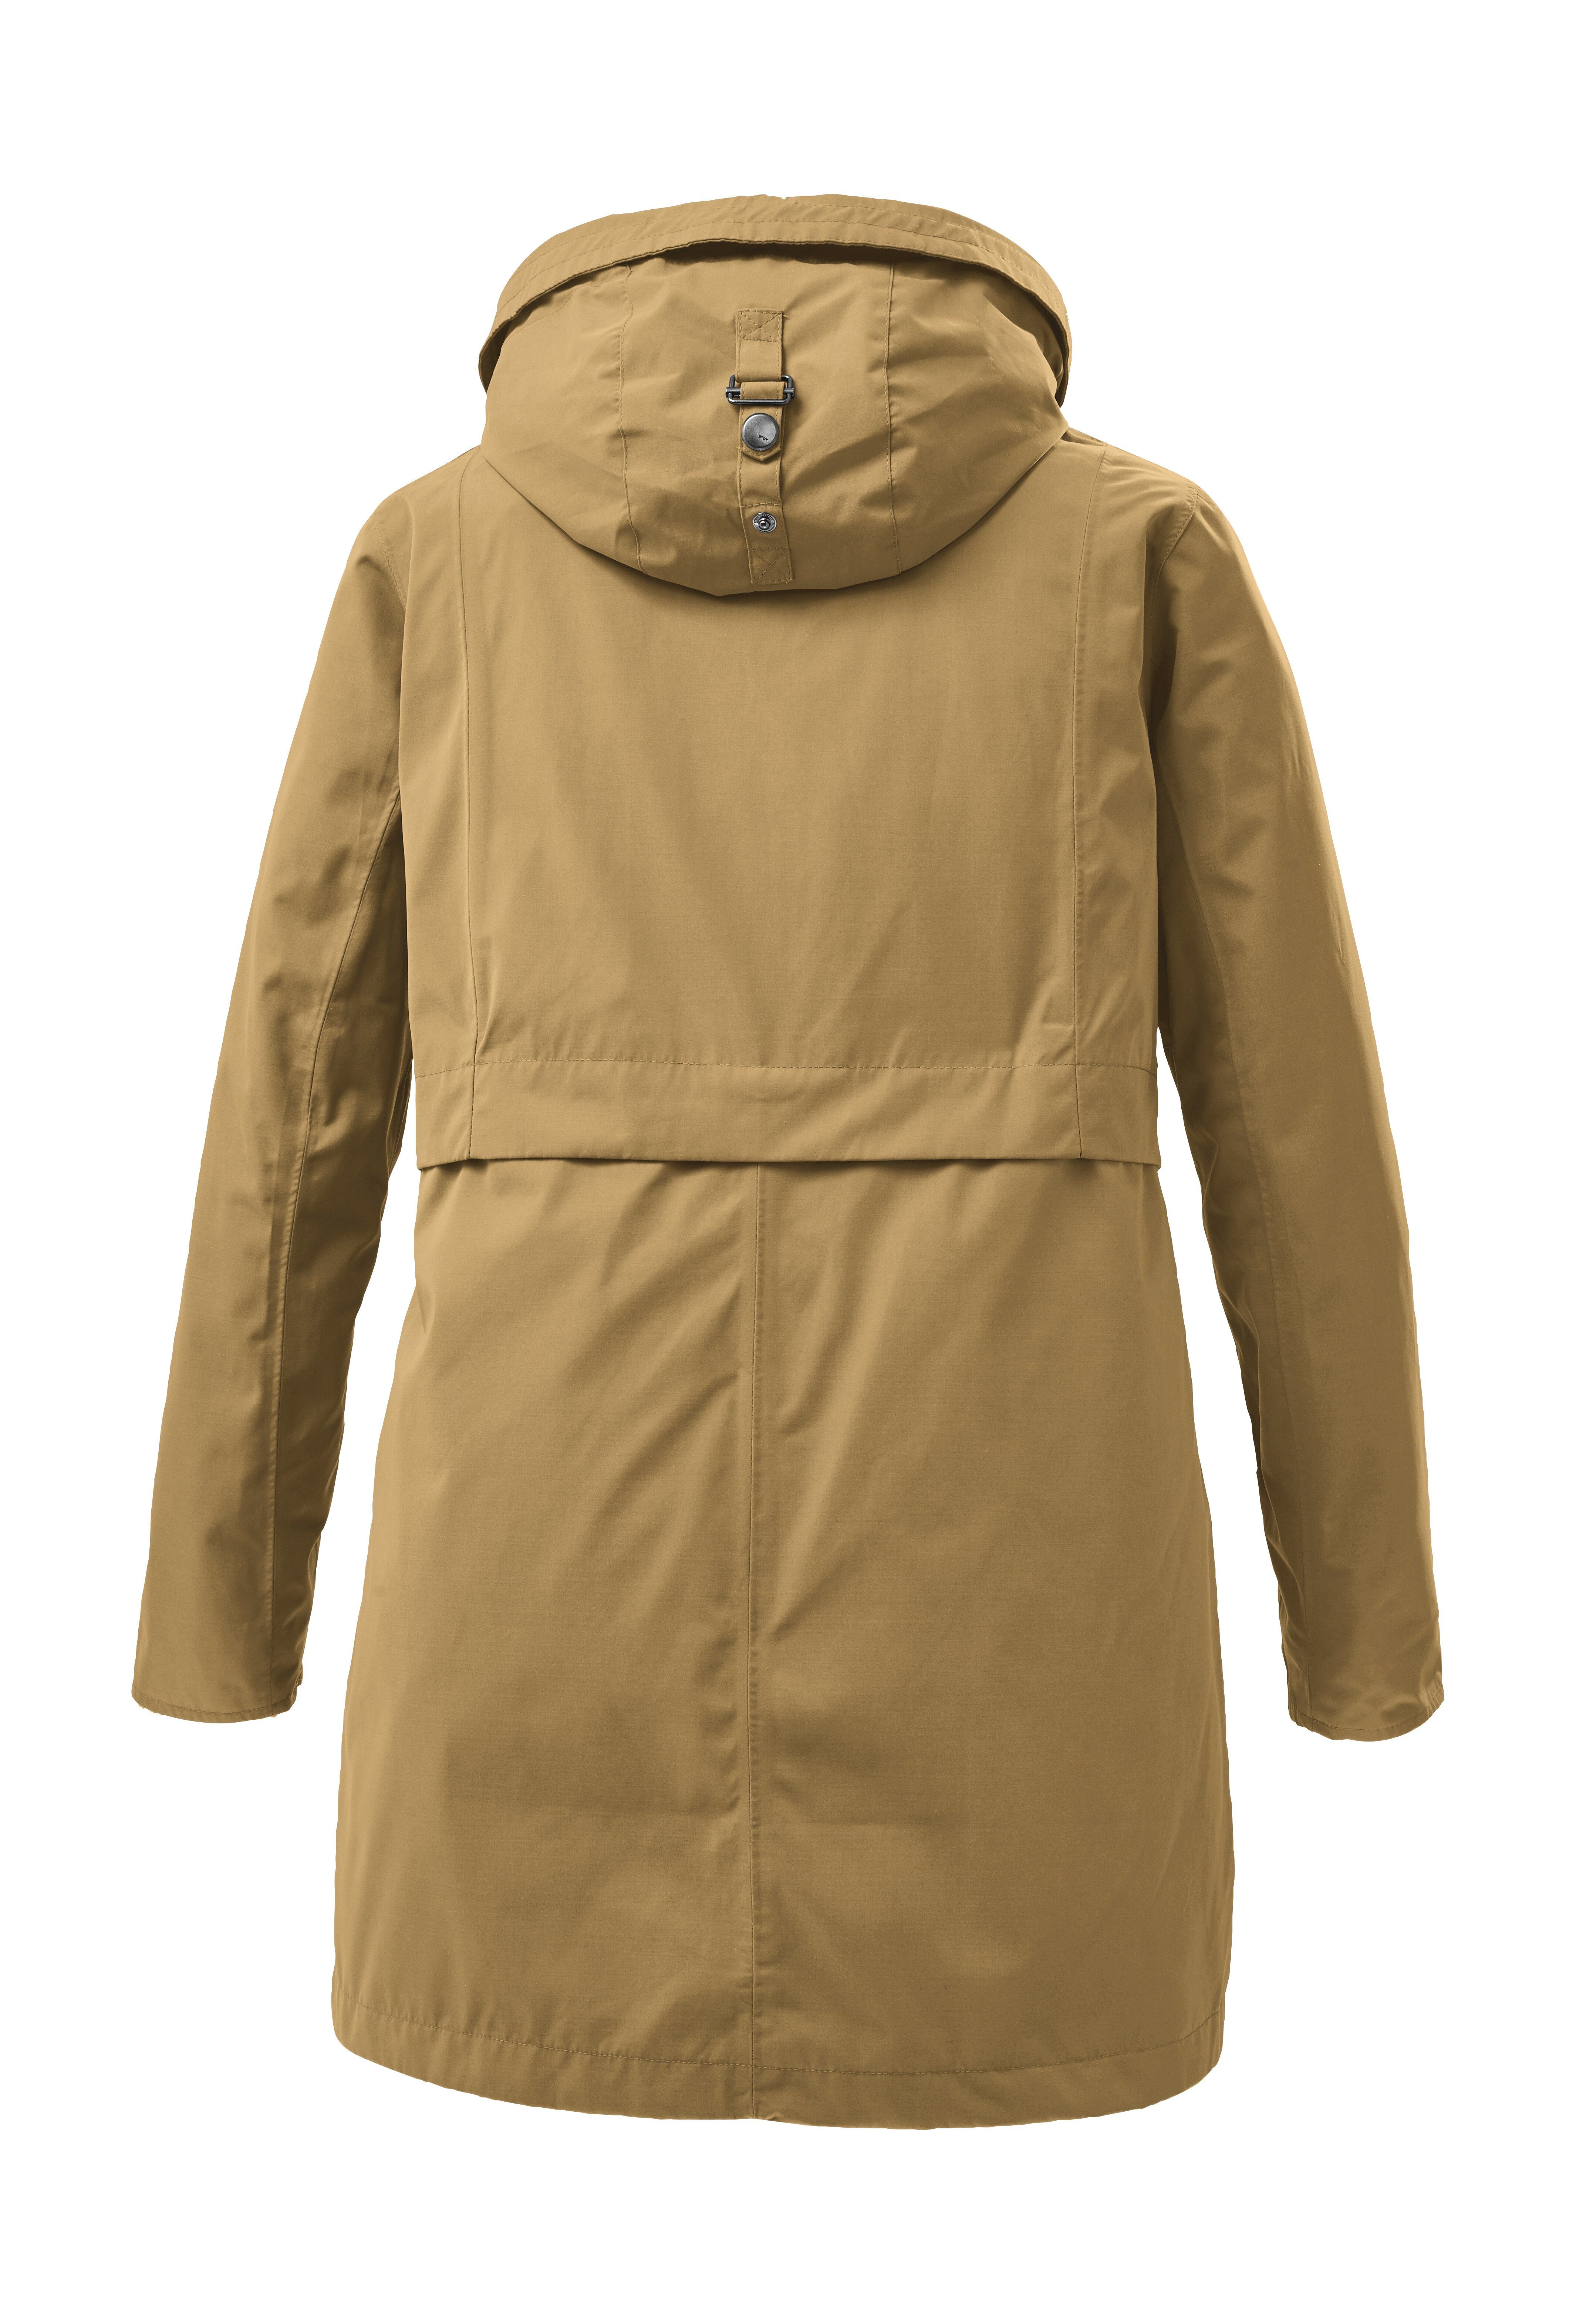 STS STOY PRK WMN 8 Parka